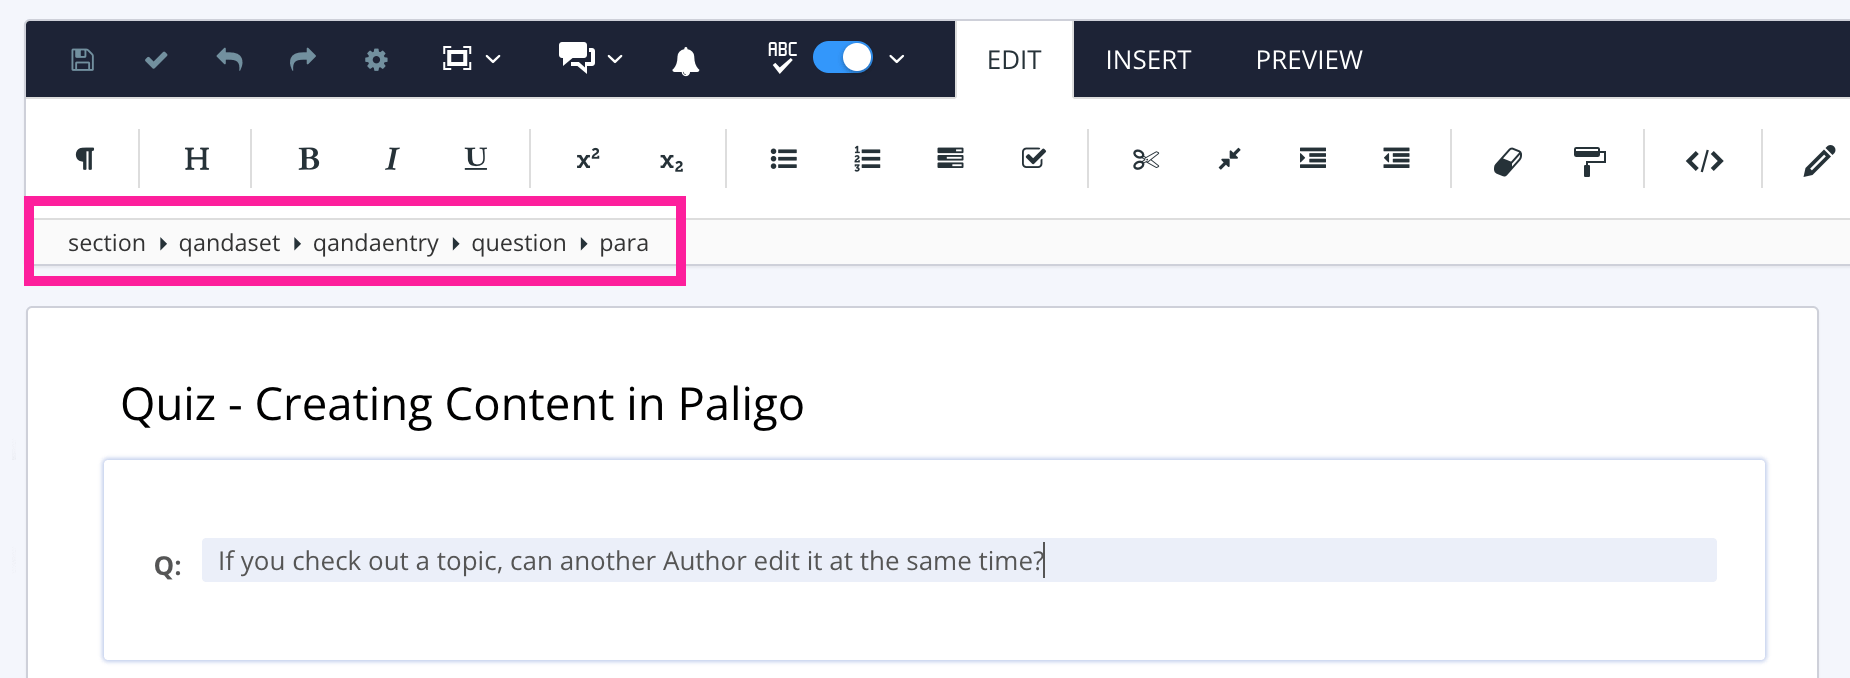 Paligo topic for a quiz. It has a title and a qandaset element. In the element structure menu, it shows the content structure is section followed by qandaset, followed by qandaentry, followed by question, followed by para. The text for the question has been entered into the para.